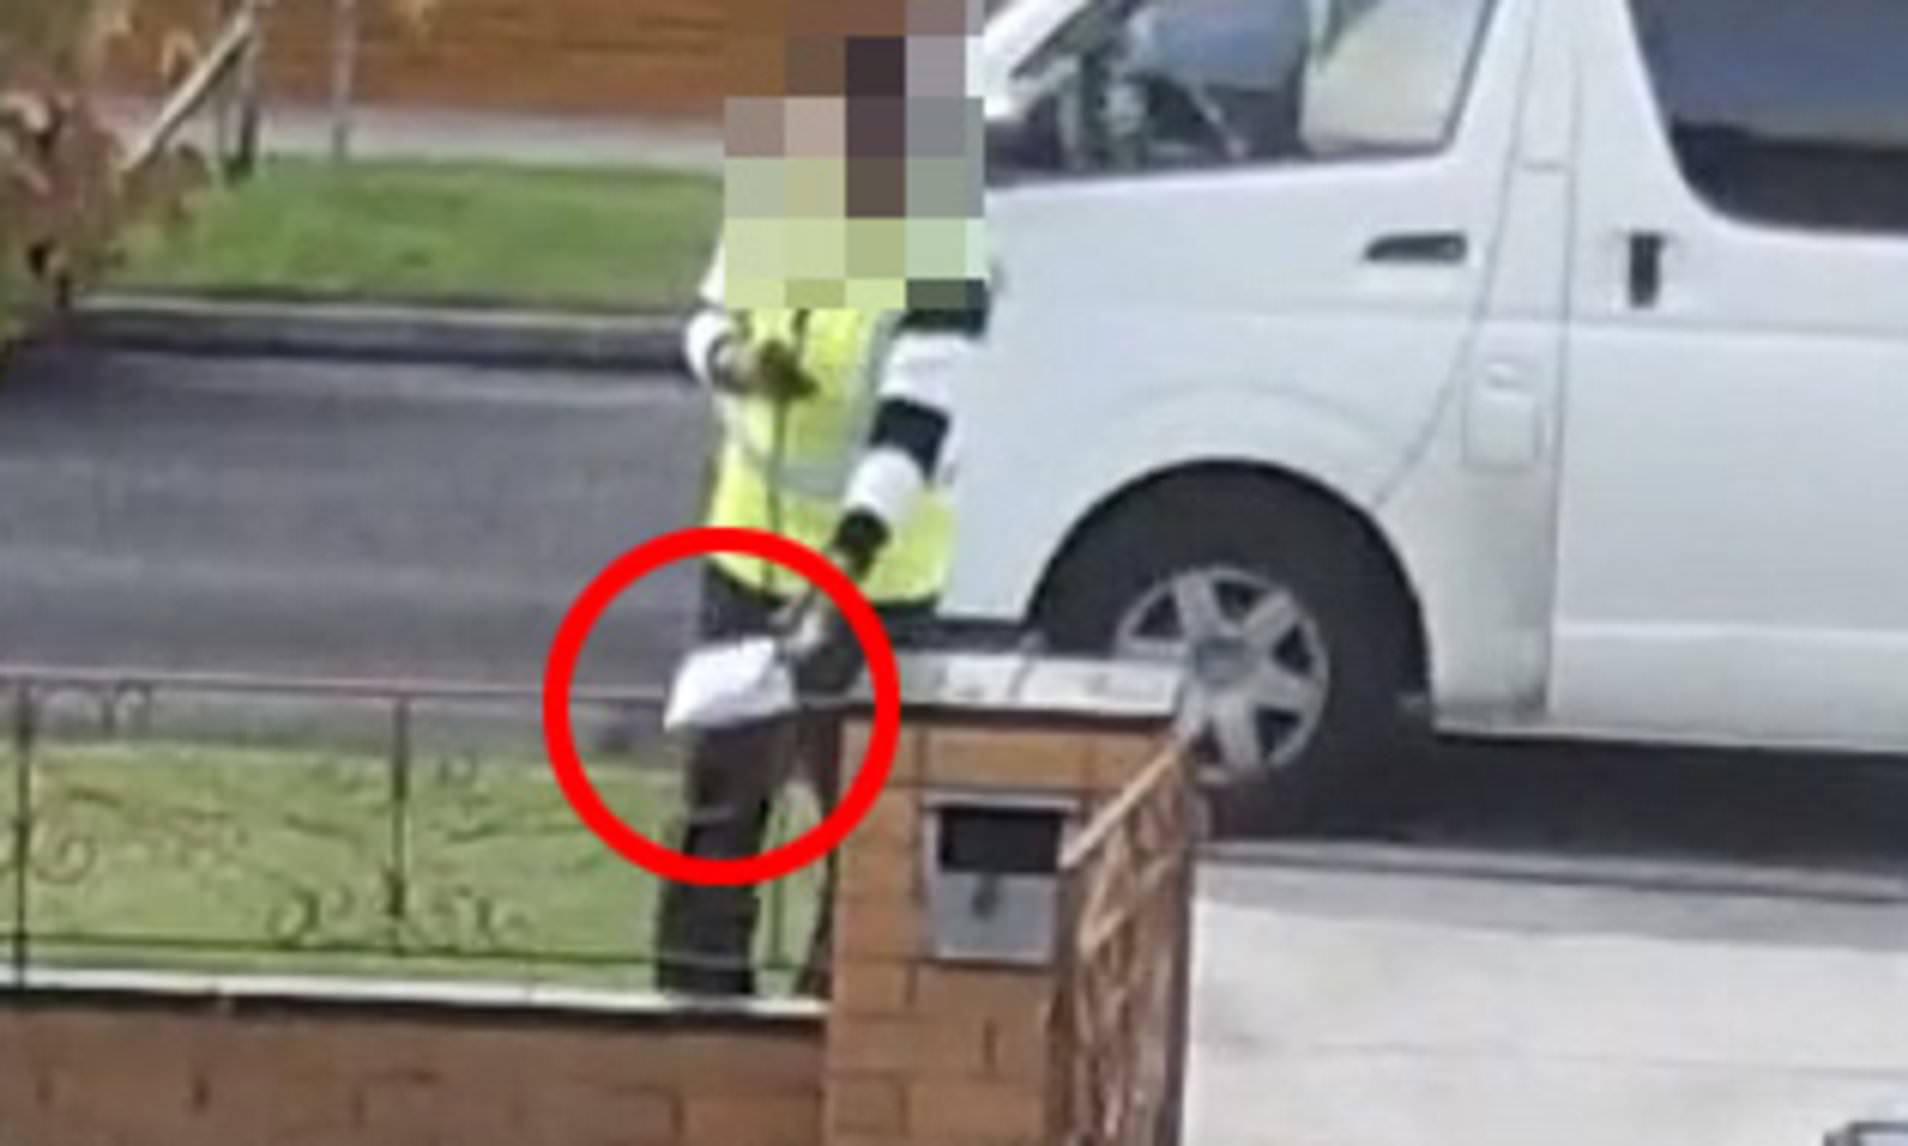 Delivery driver caught red-handed making a parcel mistake